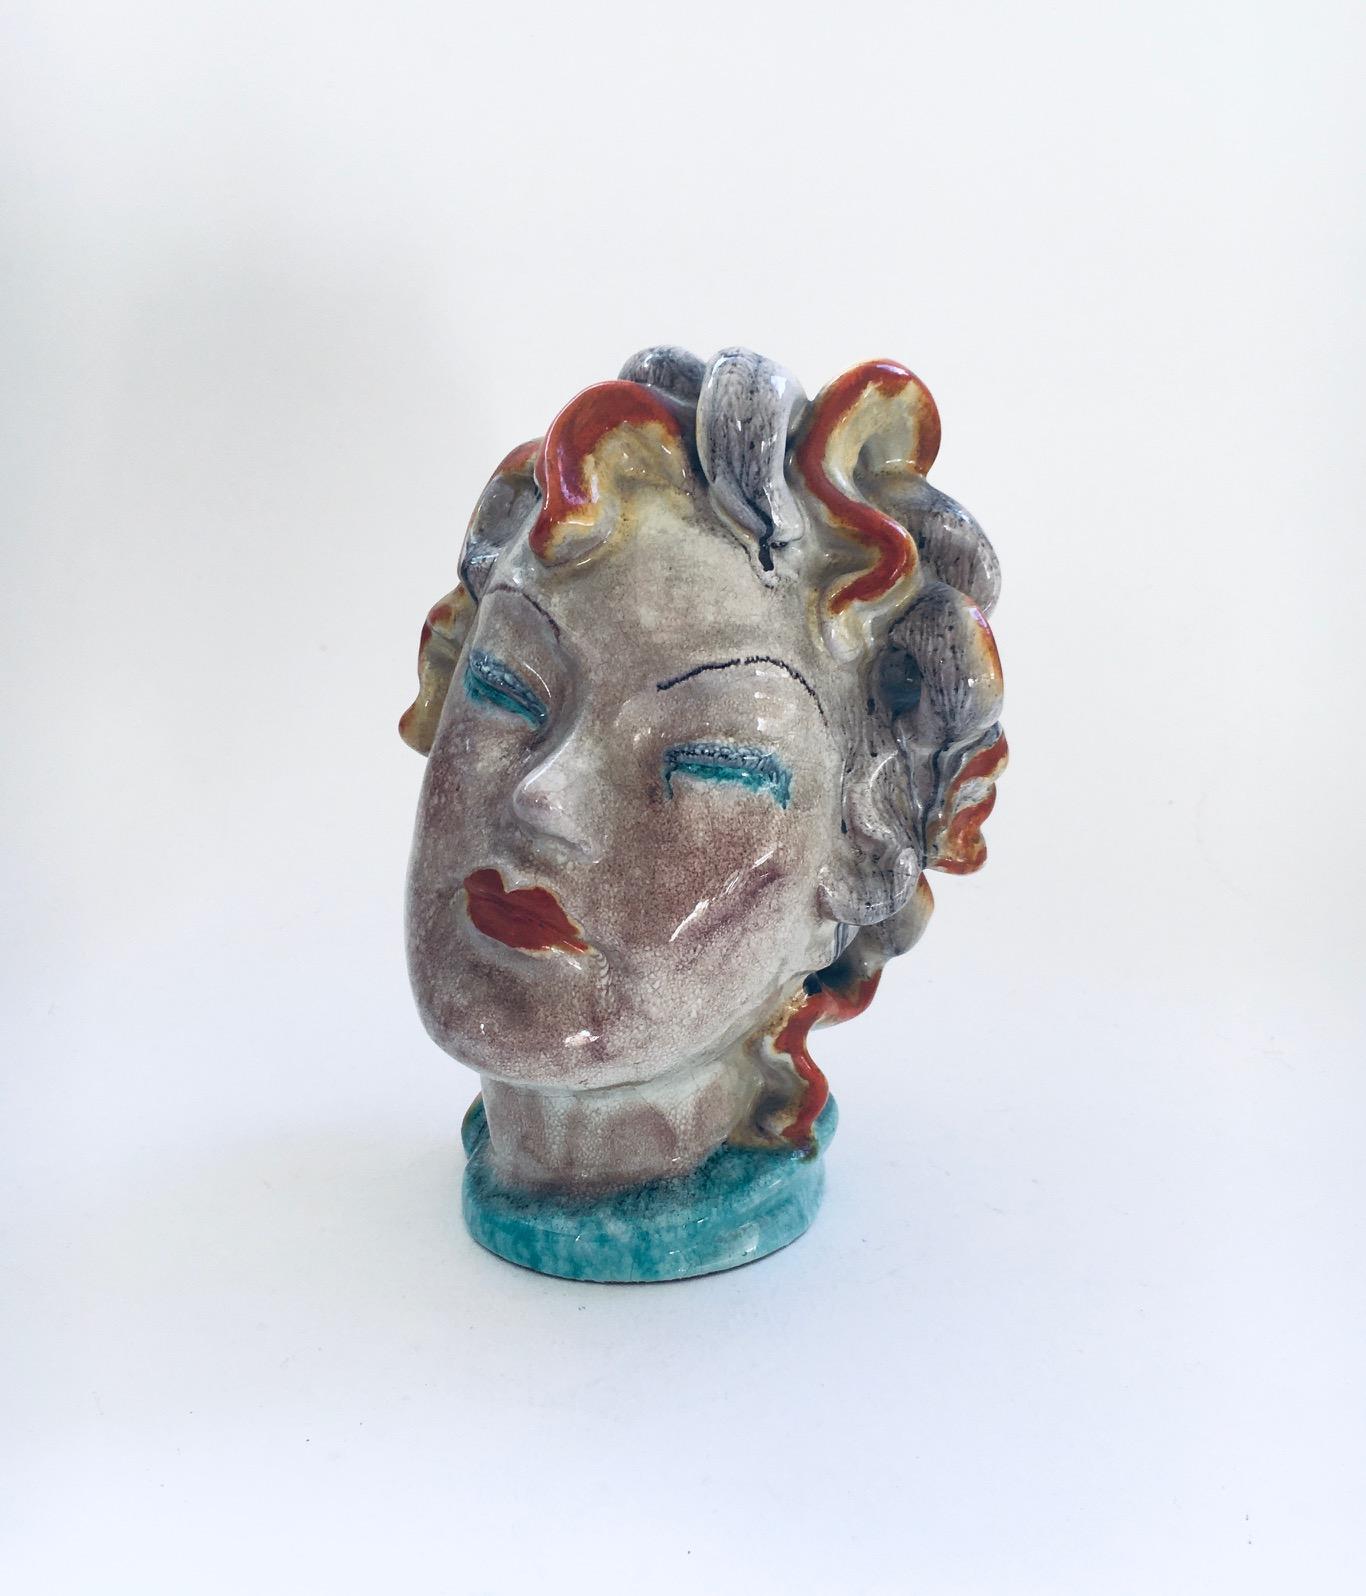 Vintage Art Deco Art Ceramics Woman Buste Figure in the style of Goldscheider. Made in the 1930's. Austria or Italy. Multi colored glazed woman head with luscious curled hair. A rare art ceramic figure. Comes in very good condition. Measures 20cm x